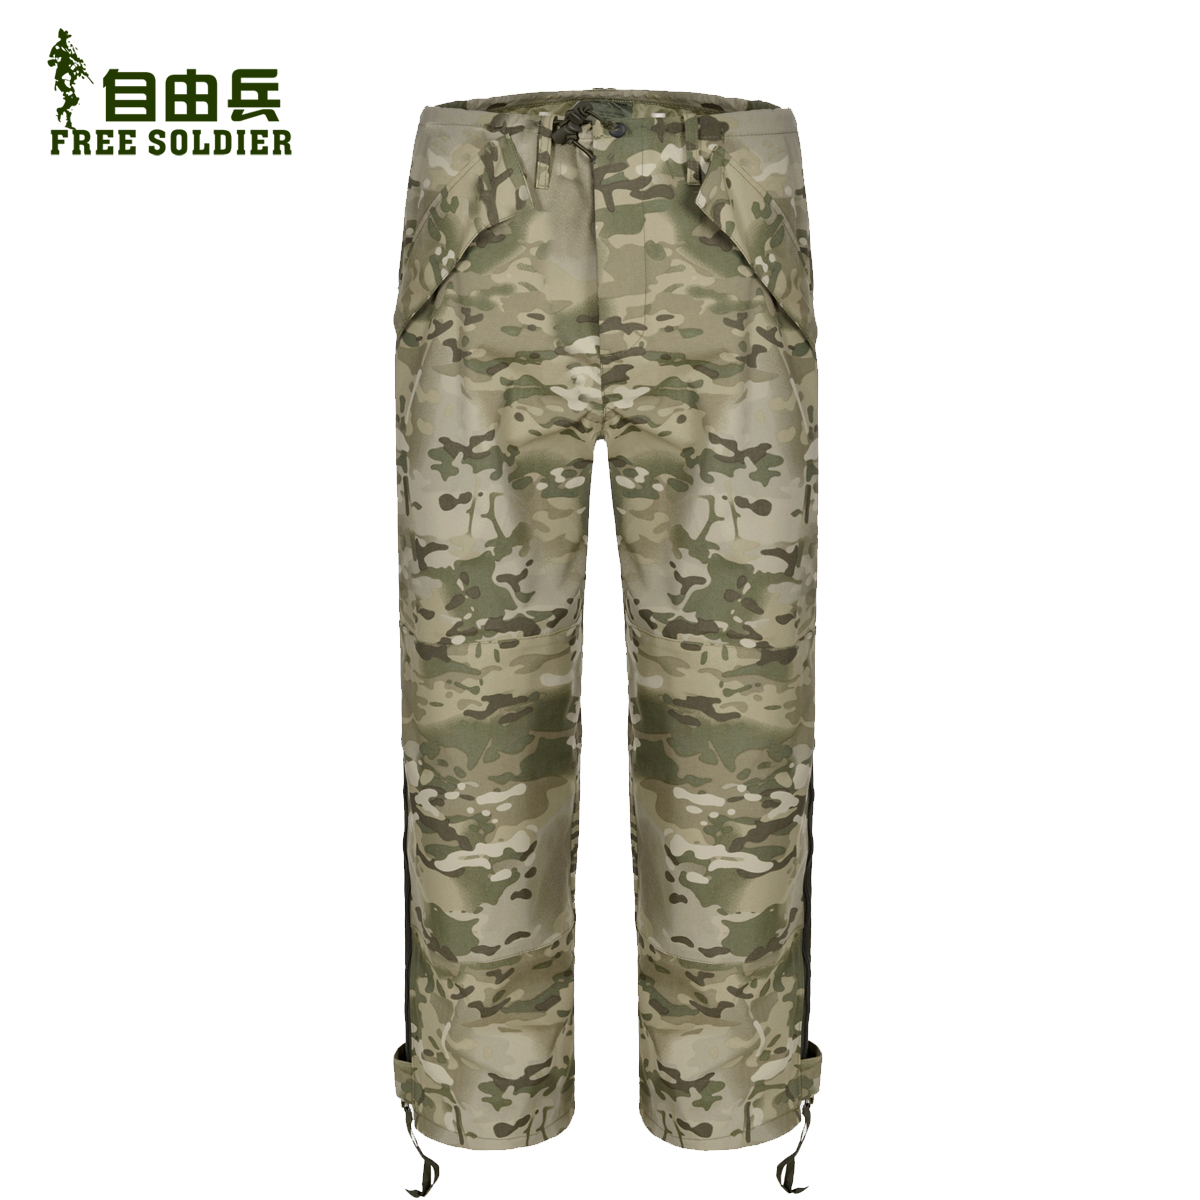 Lightweight camouflage tactical pants weatherproof waterproof rain pants for climbing hunting shooting airsoft Free shipping